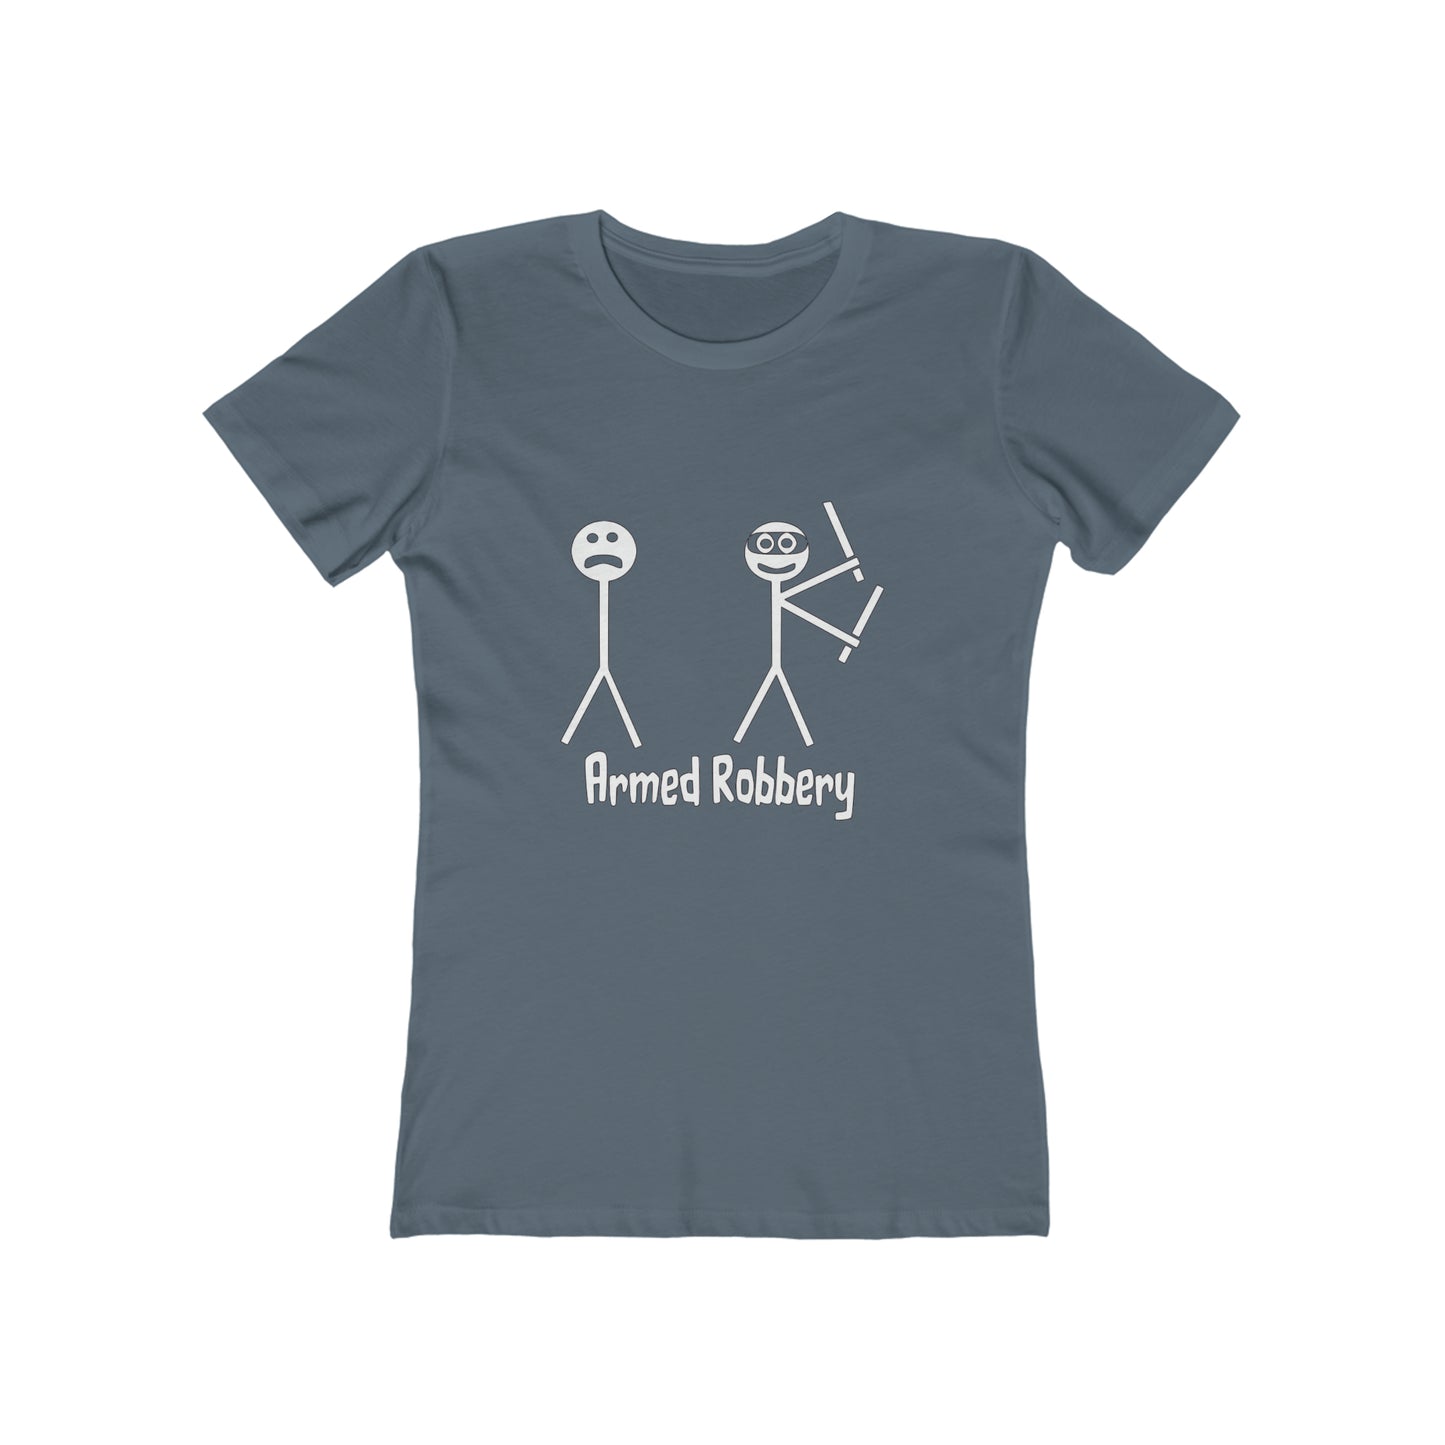 Armed Robbery - Women's T-shirt